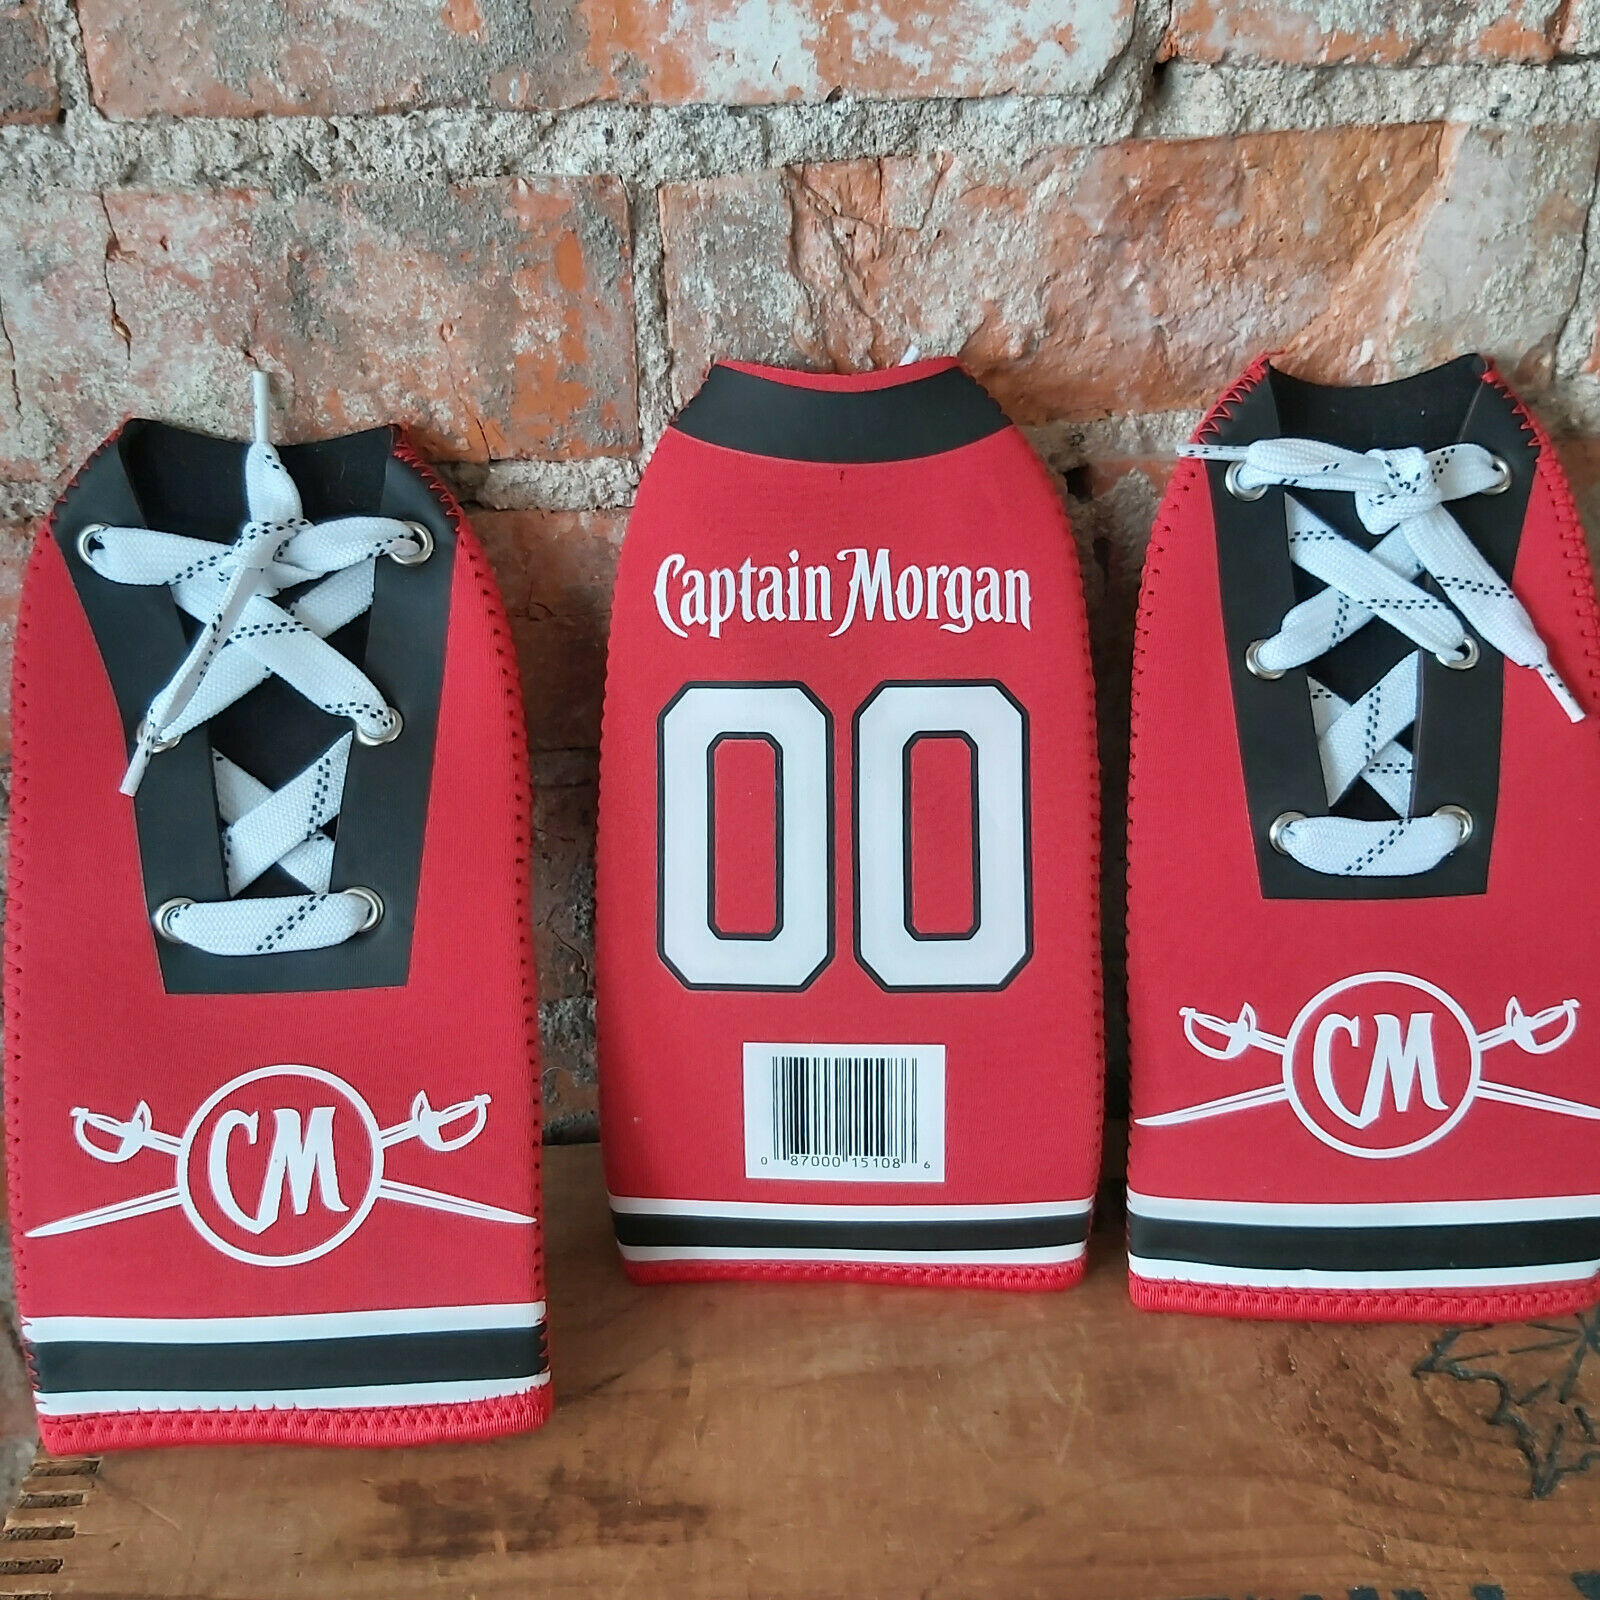 Captain Morgan Rum Red & White Hockey Jersey w' Laces Bottle Koozie Cooler